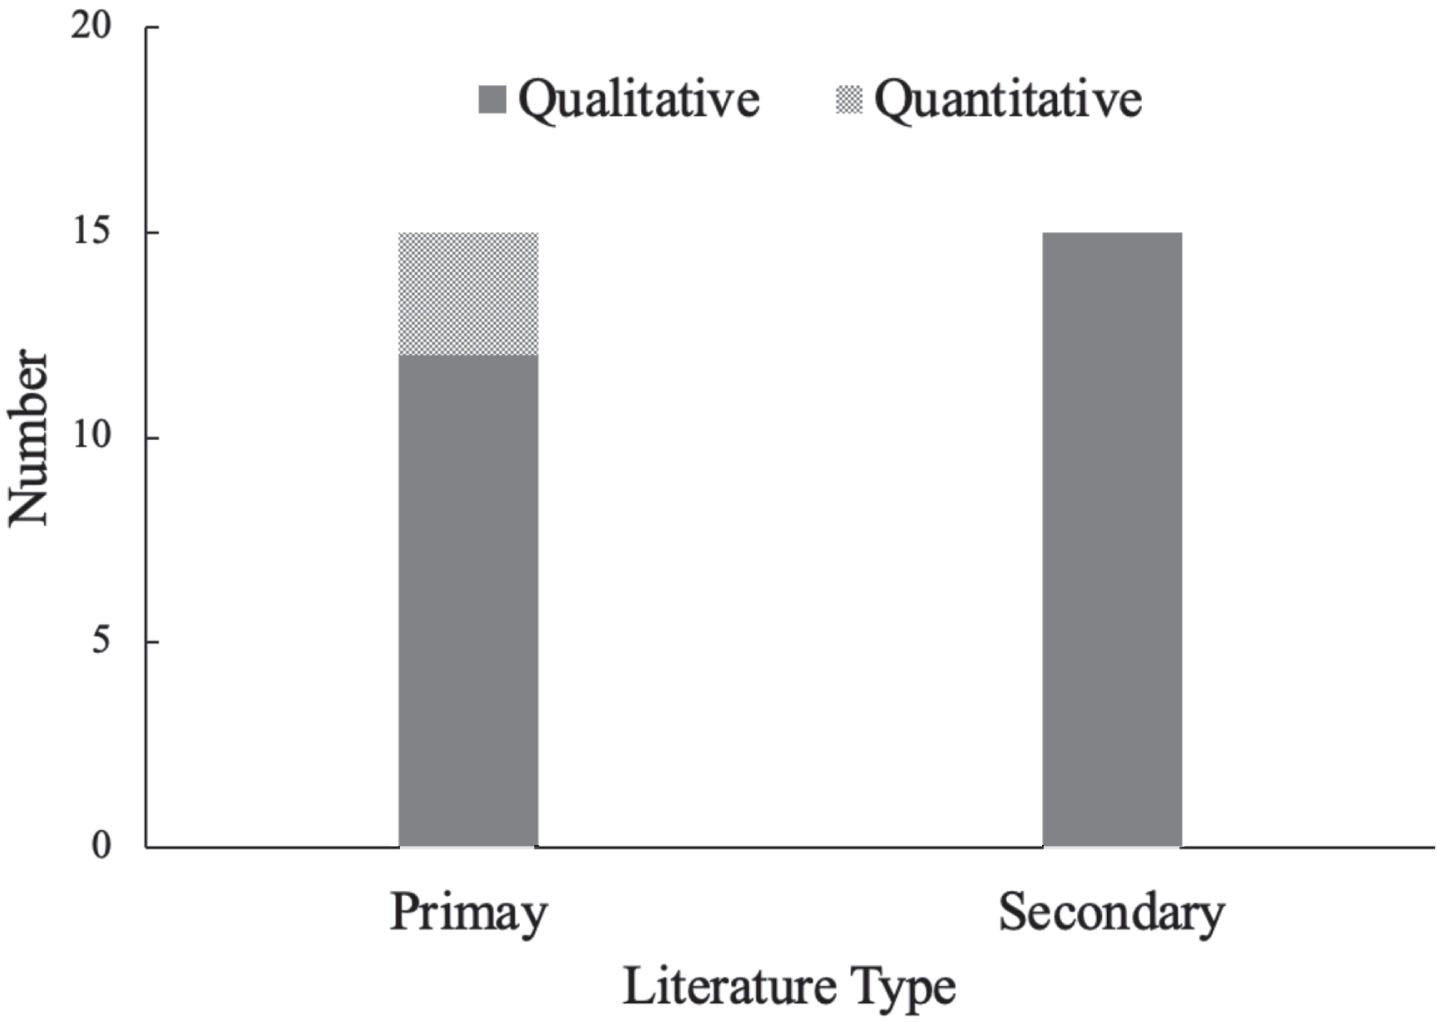 Primary research was predominantly qualitative content analyses of caregiver questionnaires, interviews, or other survey method. Some population-data was quantitatively assessed. Secondary literature focused on theoretical aspects of lucidity and methodology.